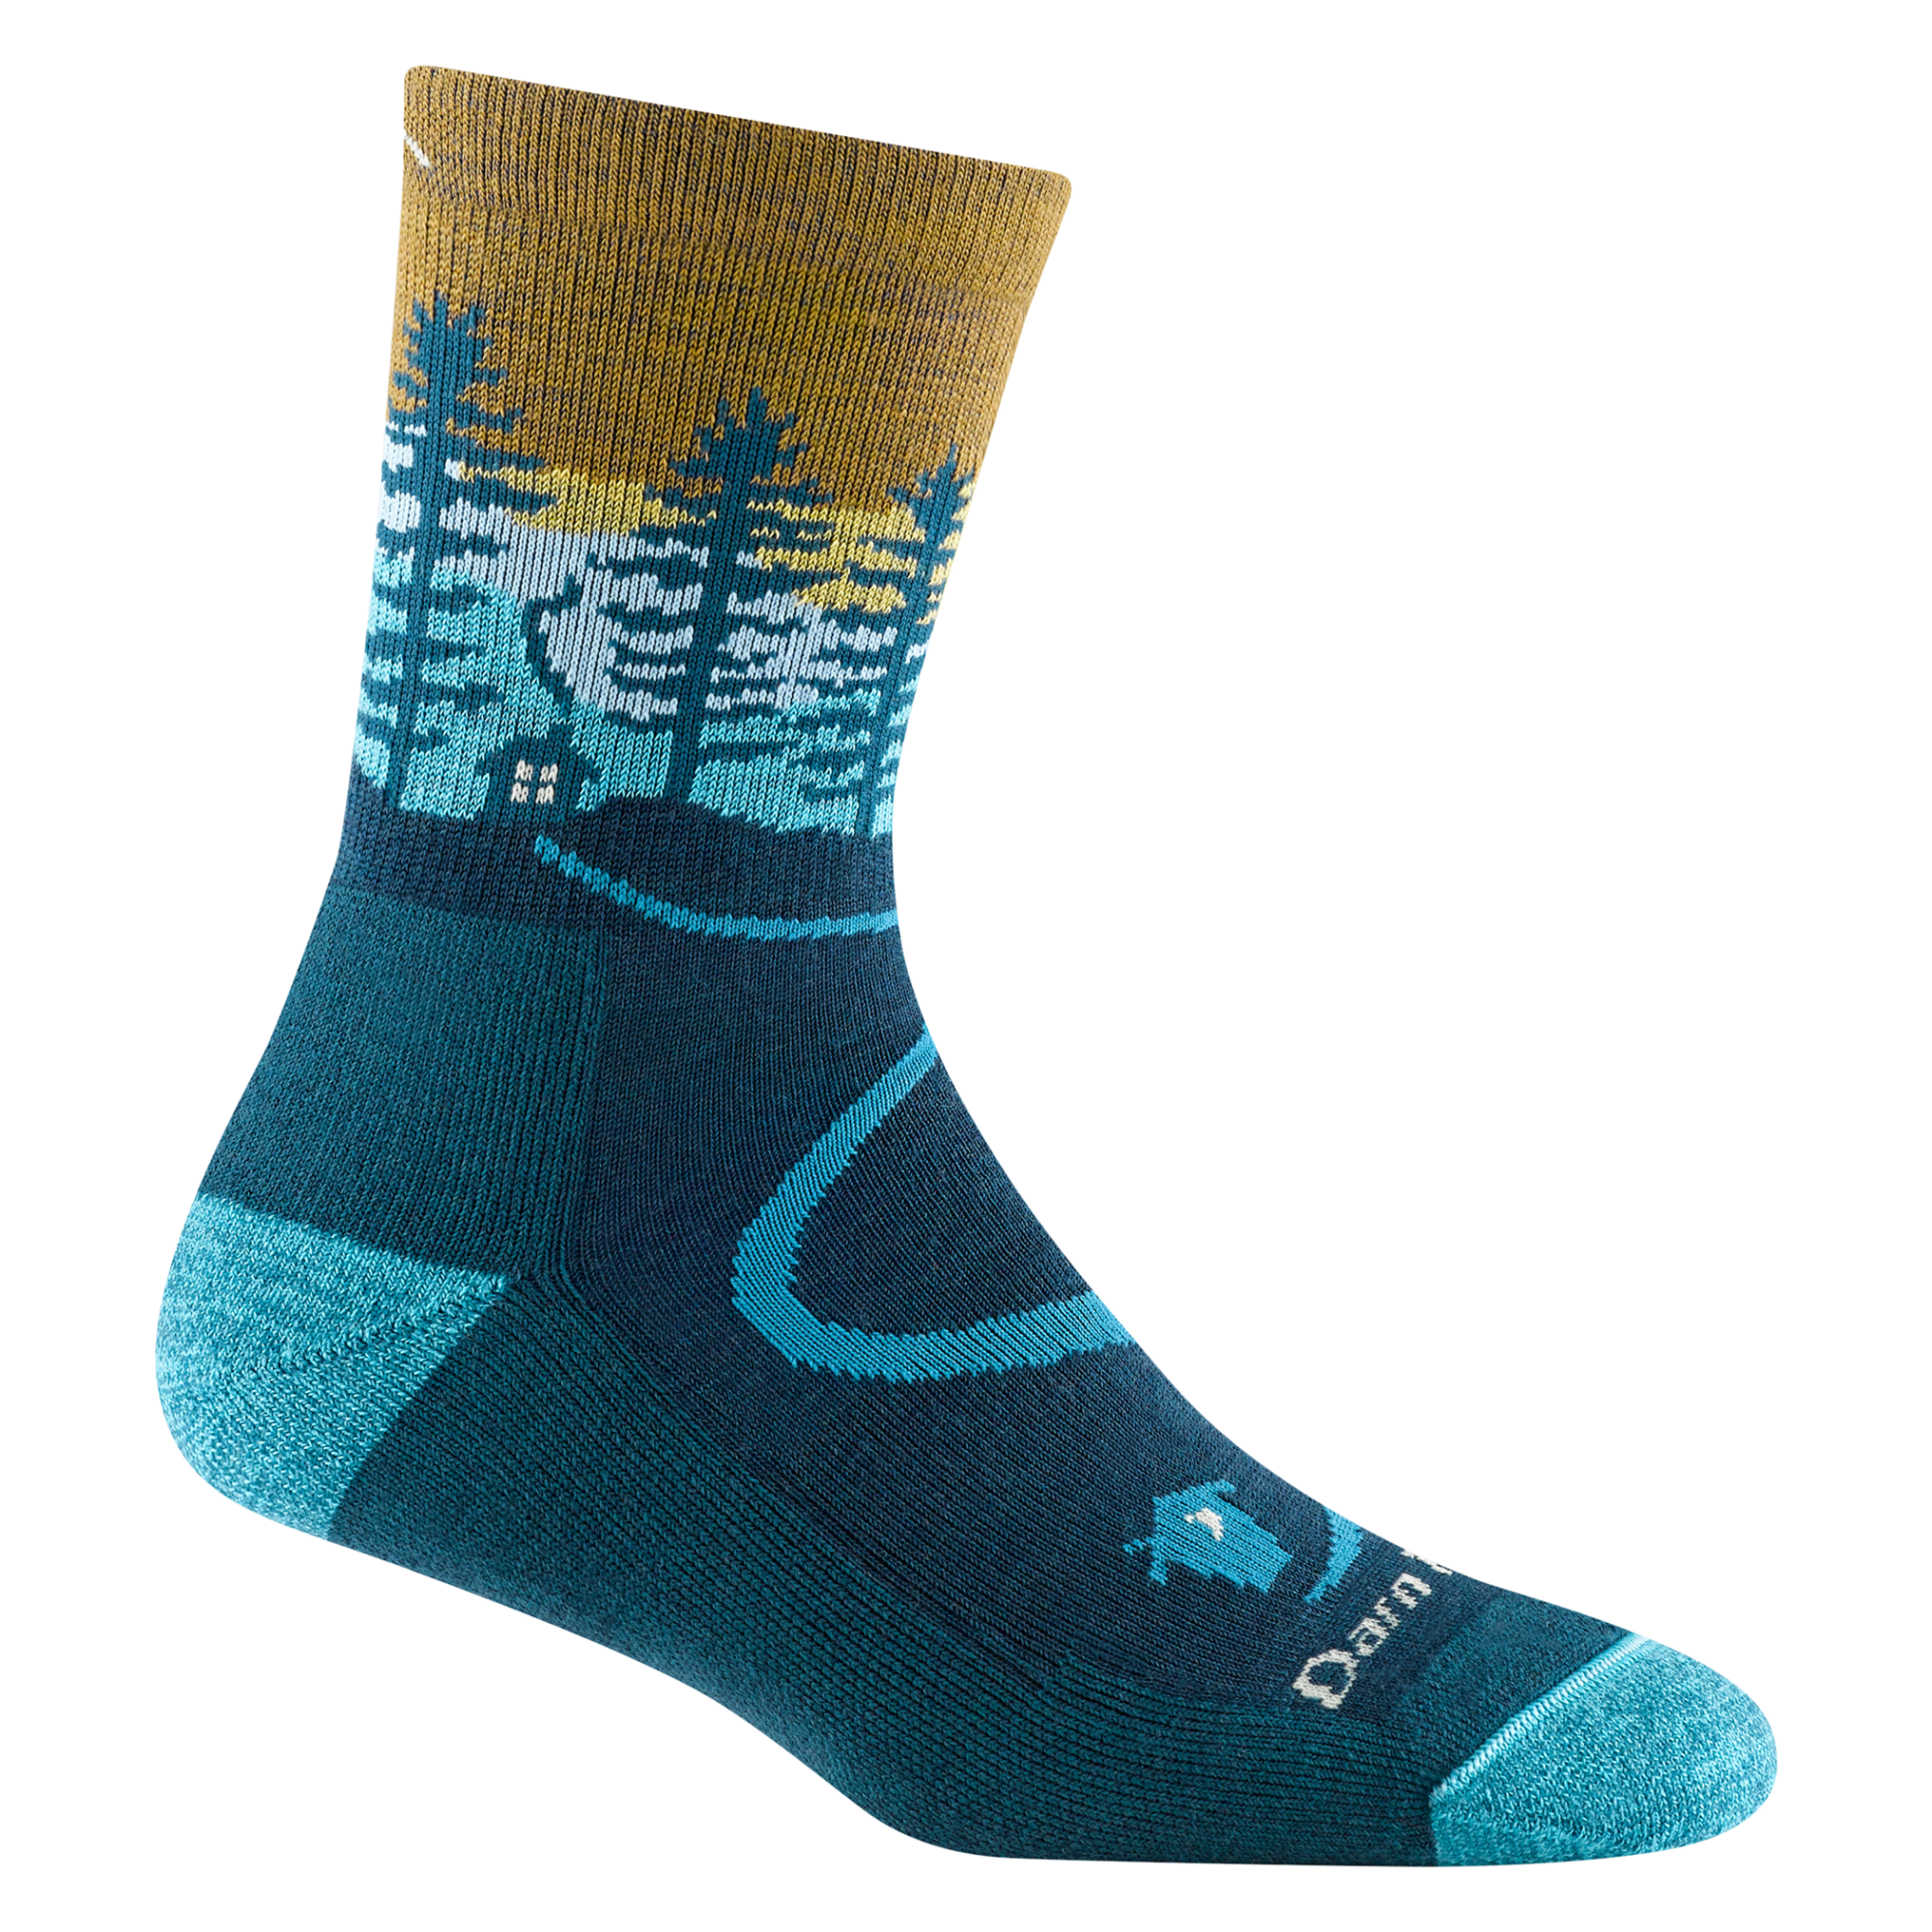 5013 women's northwoods micro crew hiking sock in dark teal with a blue toe/heel accents and cabin and tree design on the ankle